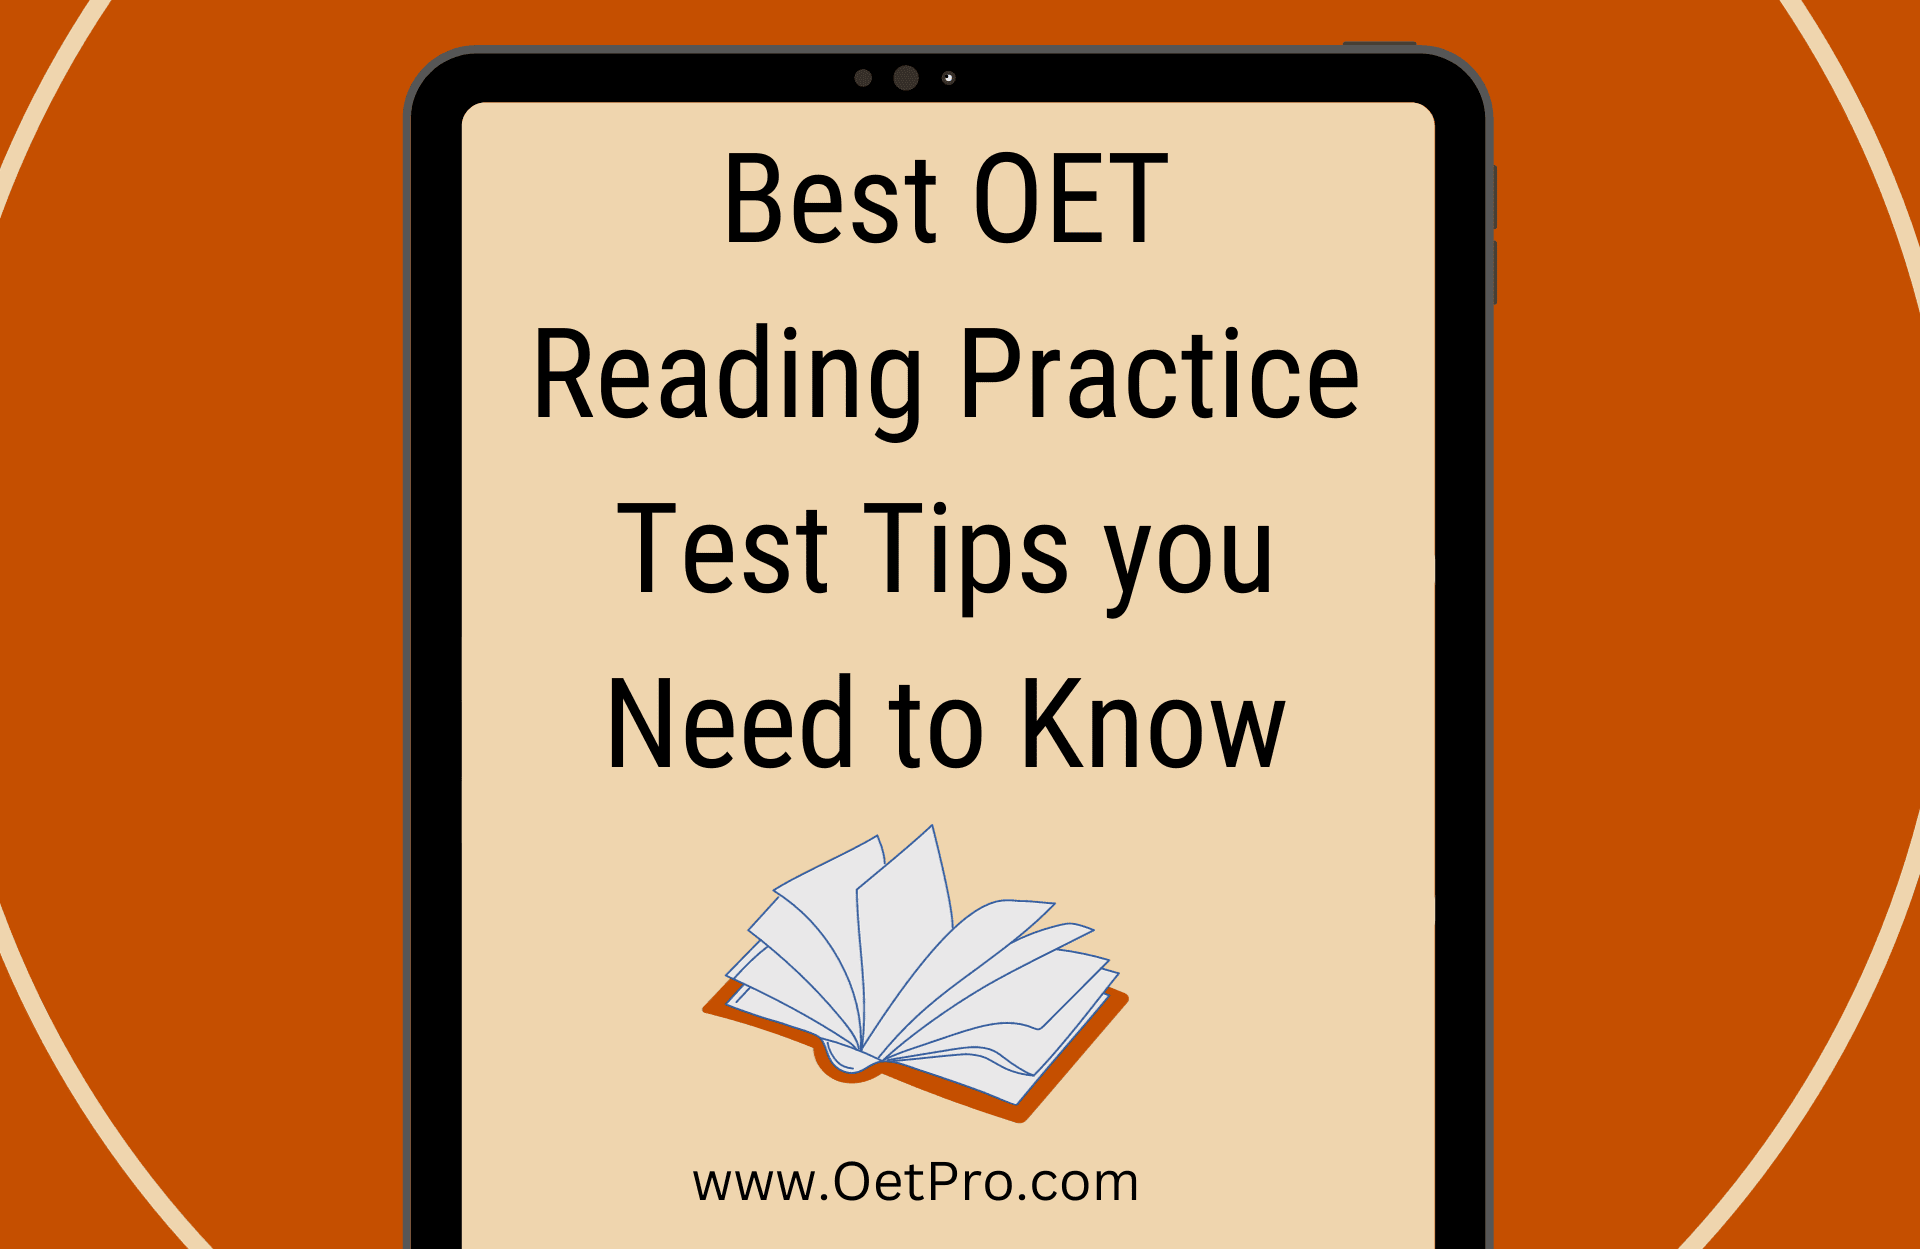 Best OET Reading Practice Test Tips You Need to Know